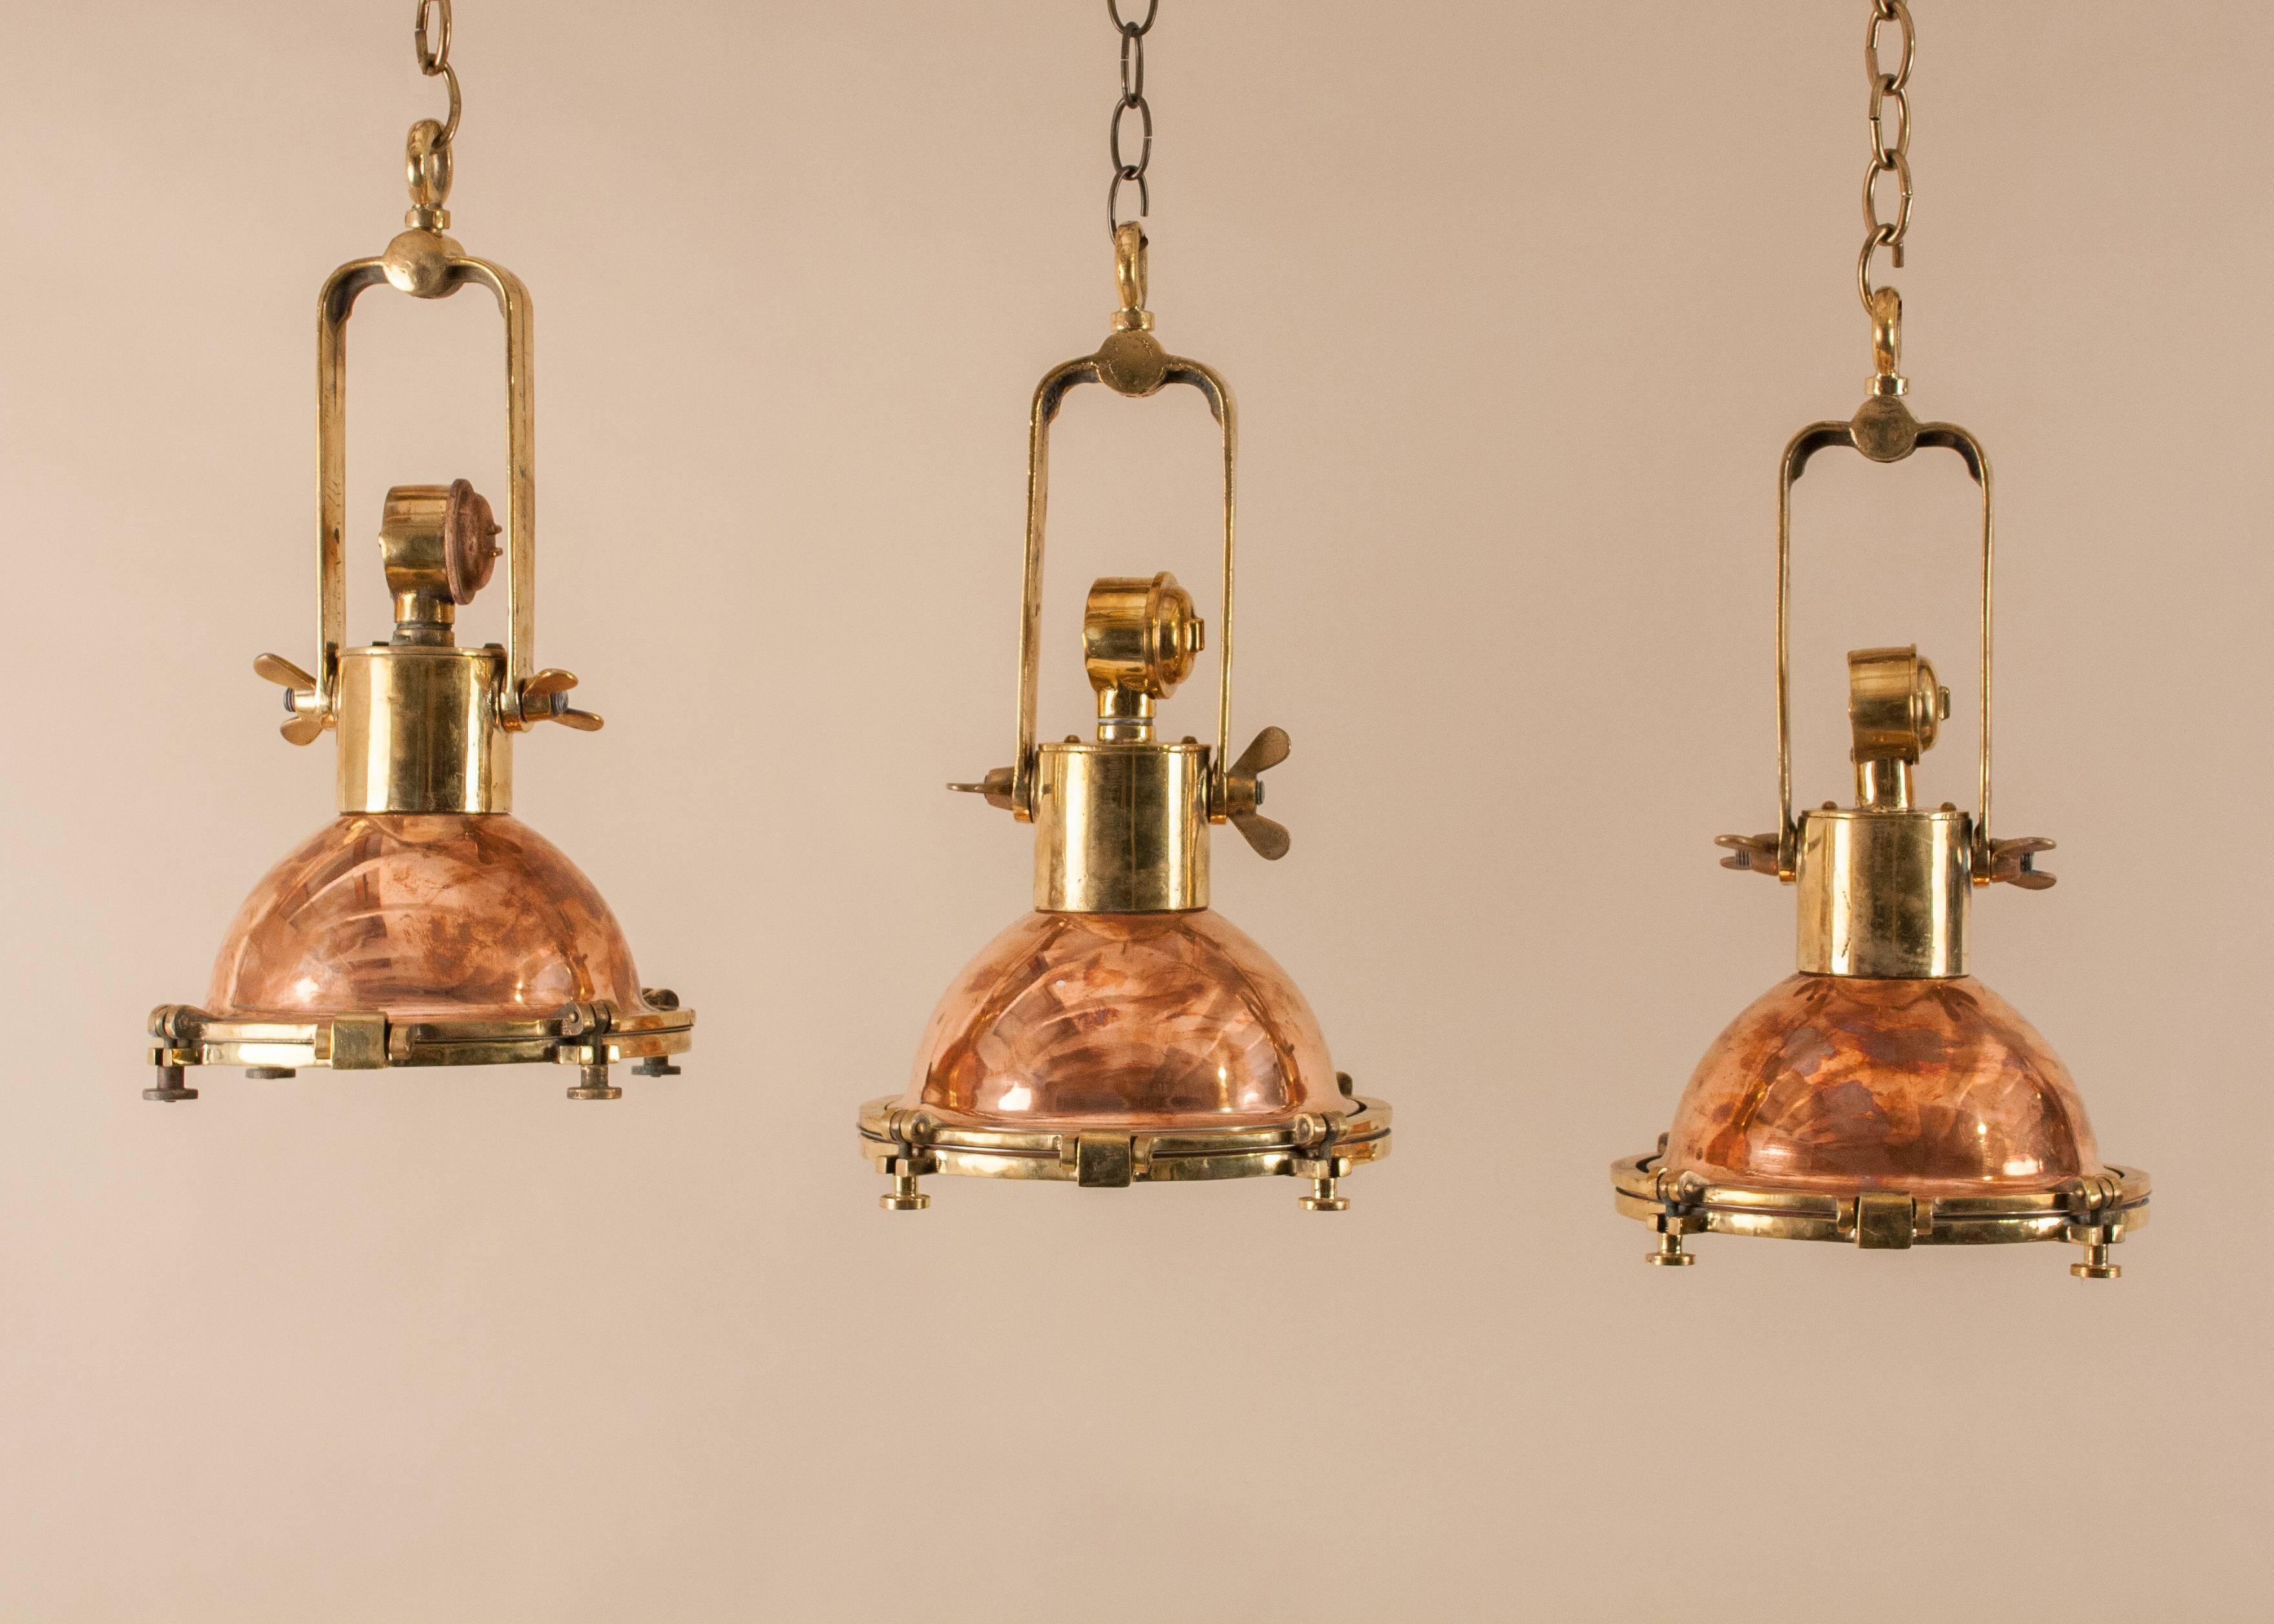 Suite of three petite 1960s copper and brass ship passageway lights with great proportions and patina. Salvaged from a maritime vessel and restored to near-original condition, these authentic nautical pendants have interior steel reflectors and